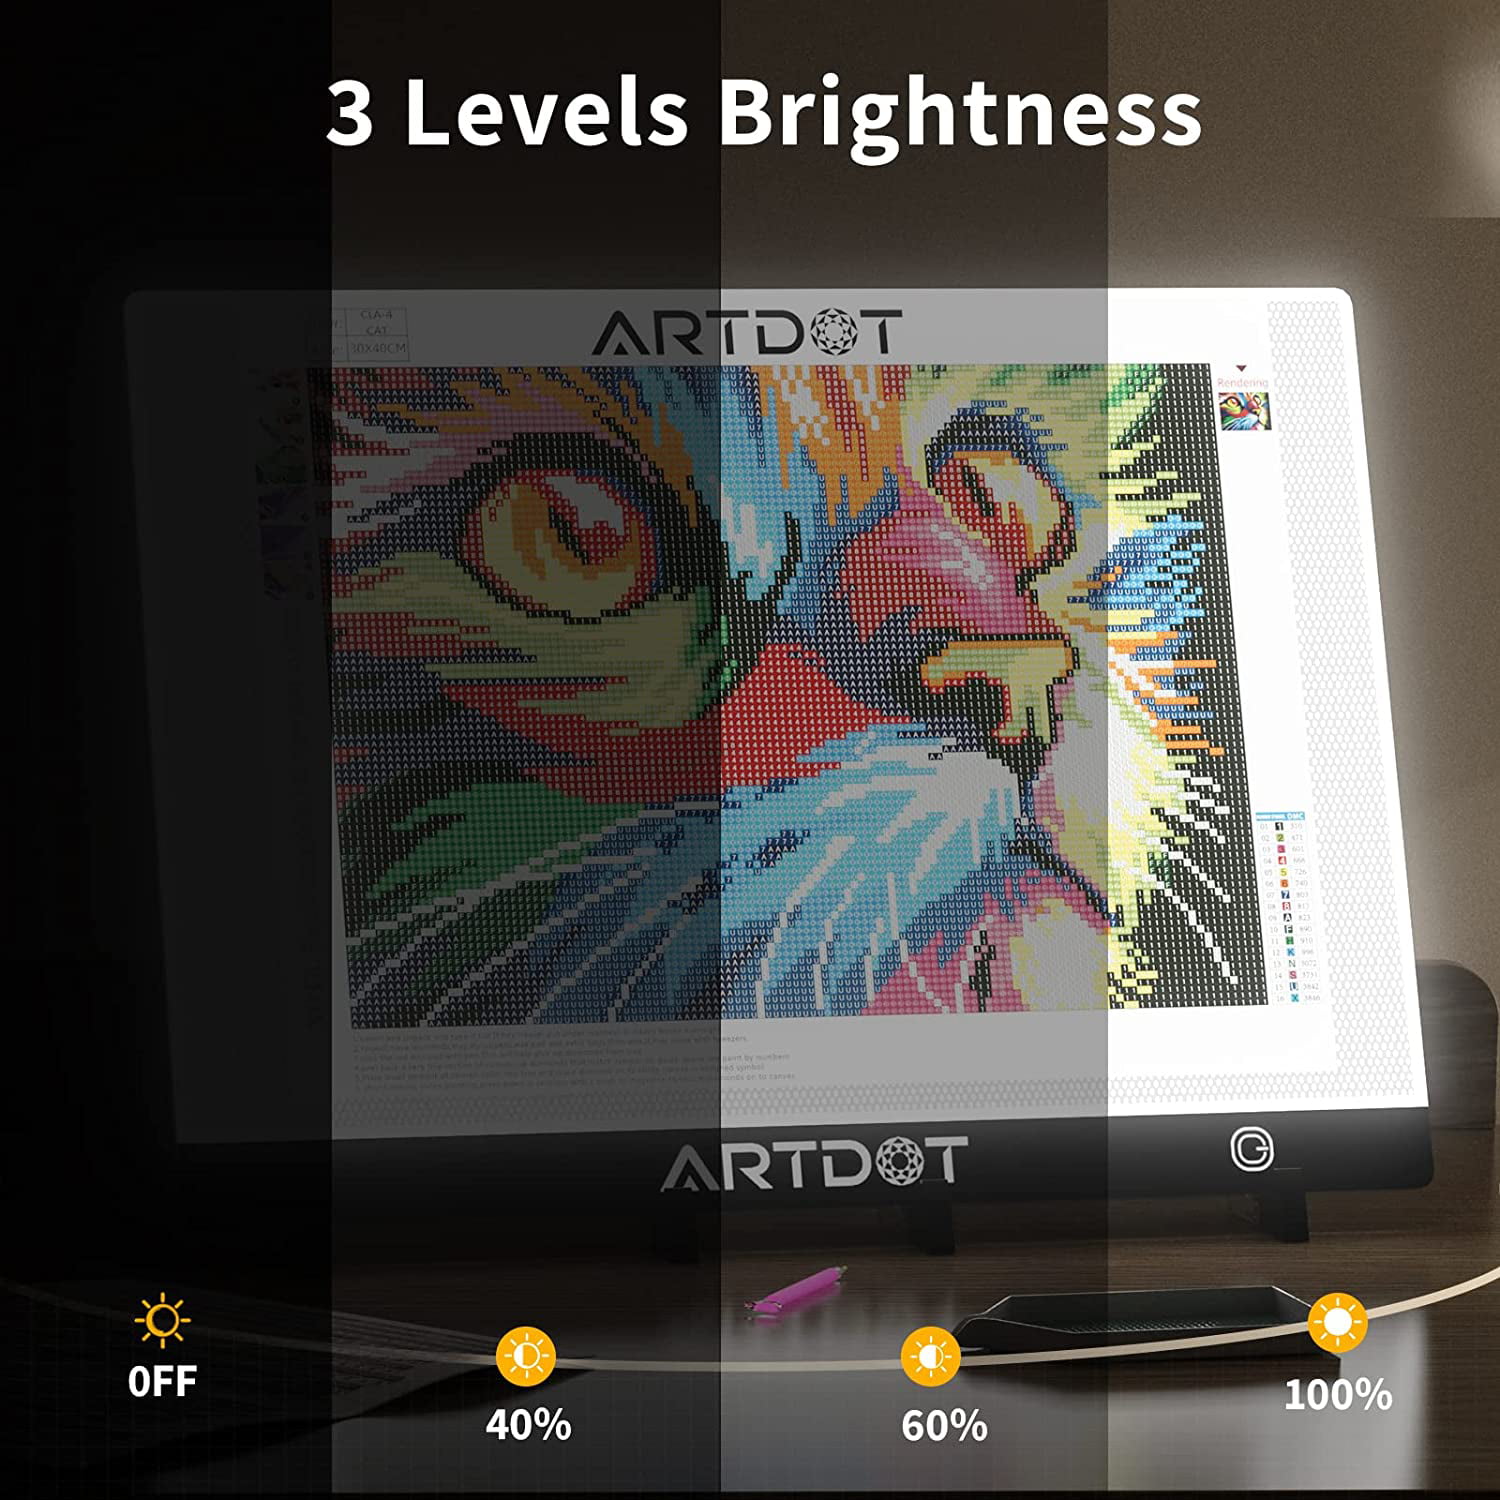 ARTDOT A2 LED Light Pad for Diamond Painting USB Powered Light Board Kit, Adjustable Brightness with 12 Angles Stand and Clips, Size: 23.6 x 15.7